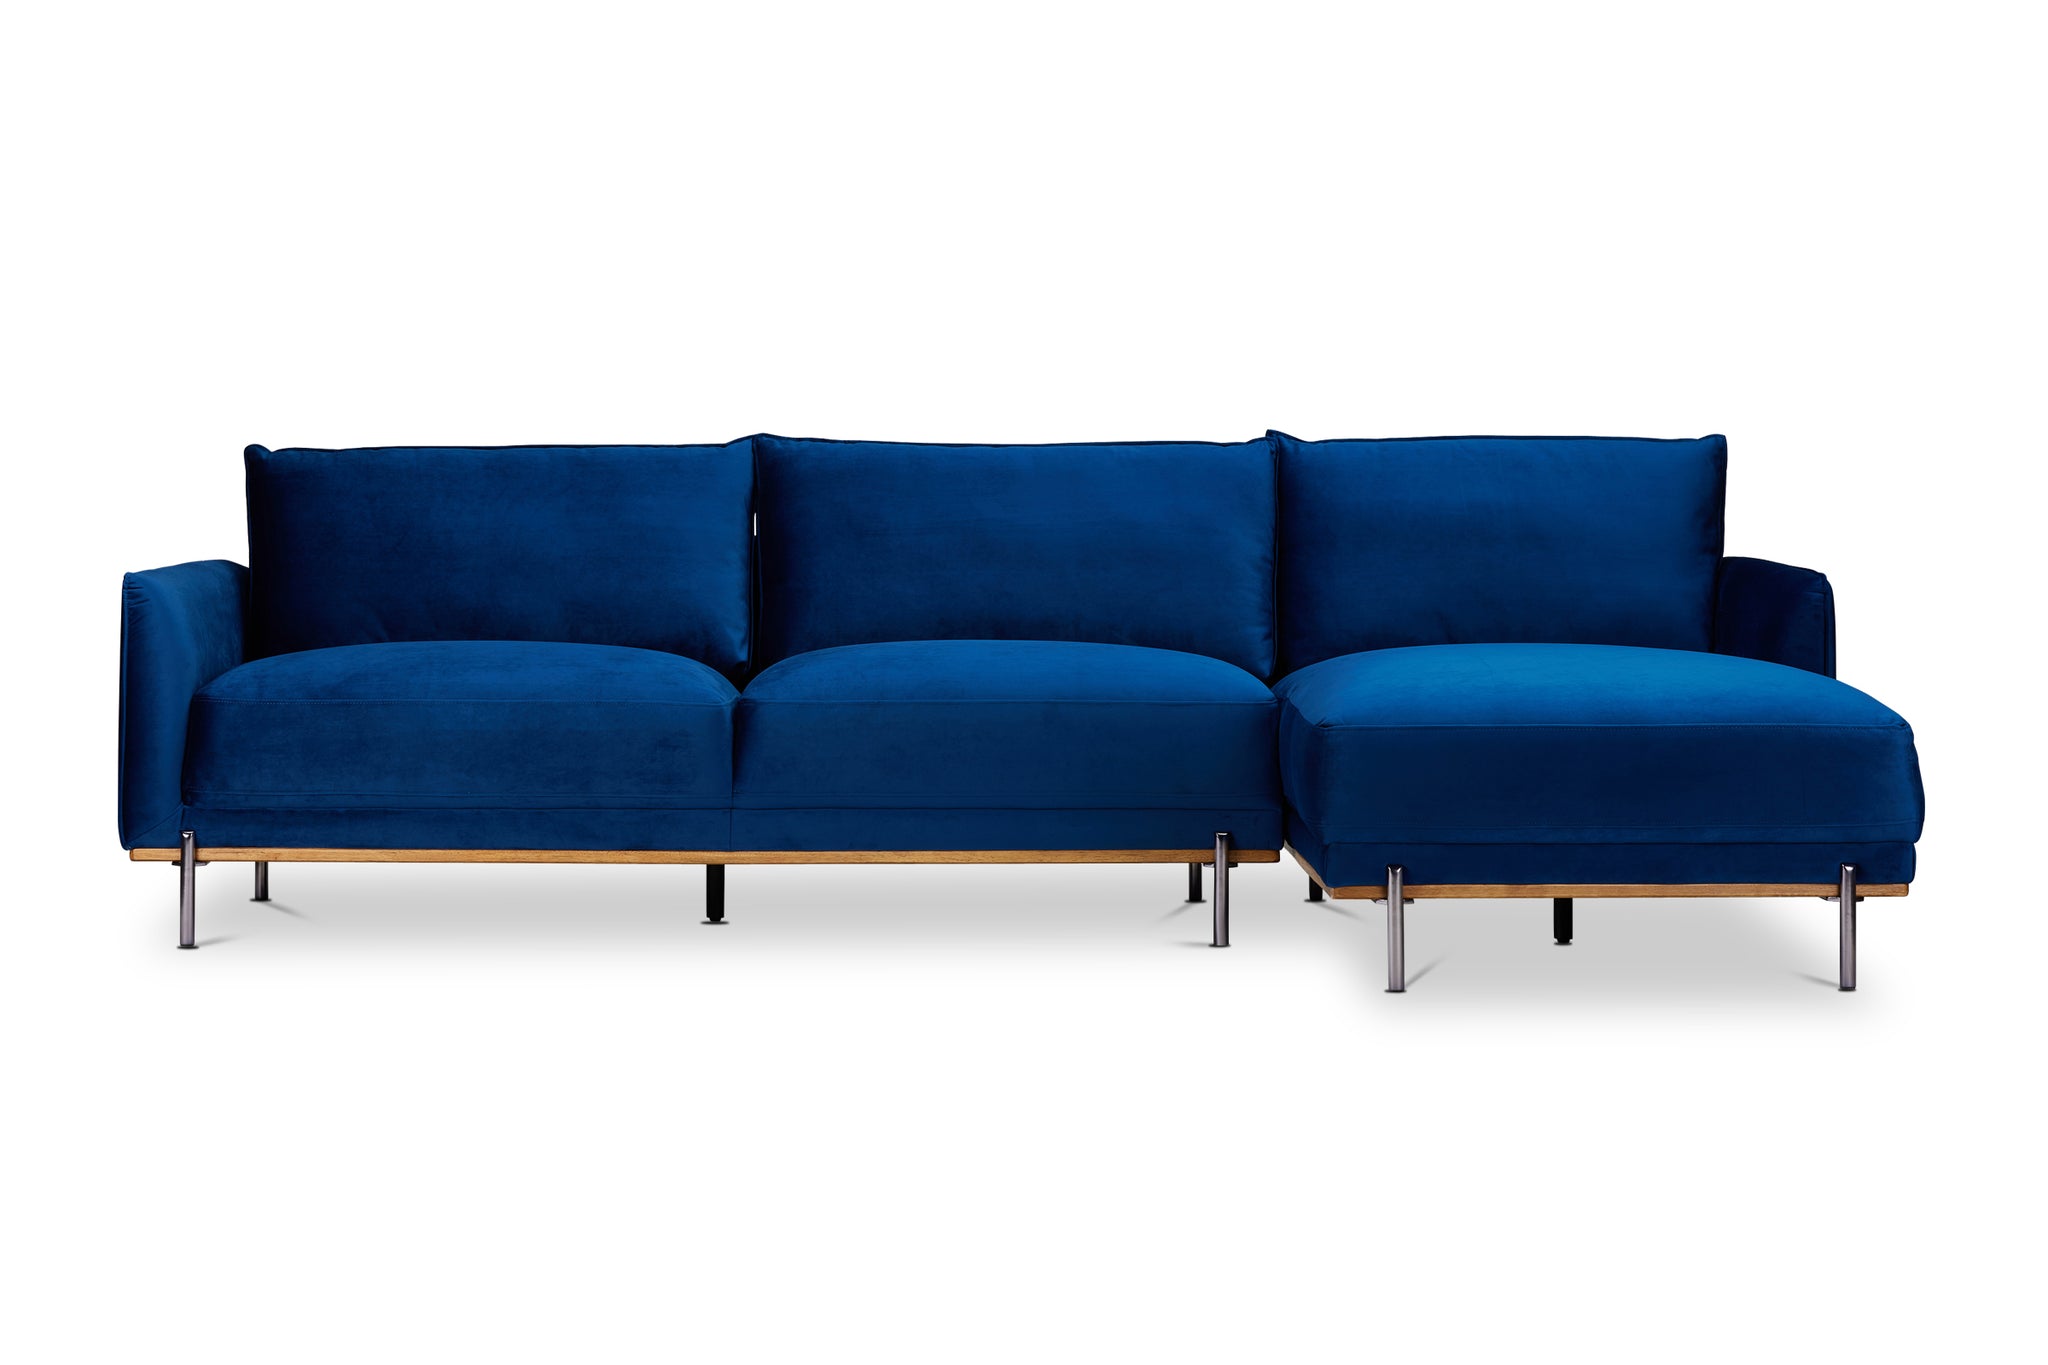 Jude 2pc Sectional Sofa :: Configuration: RAF - Chaise on the Right